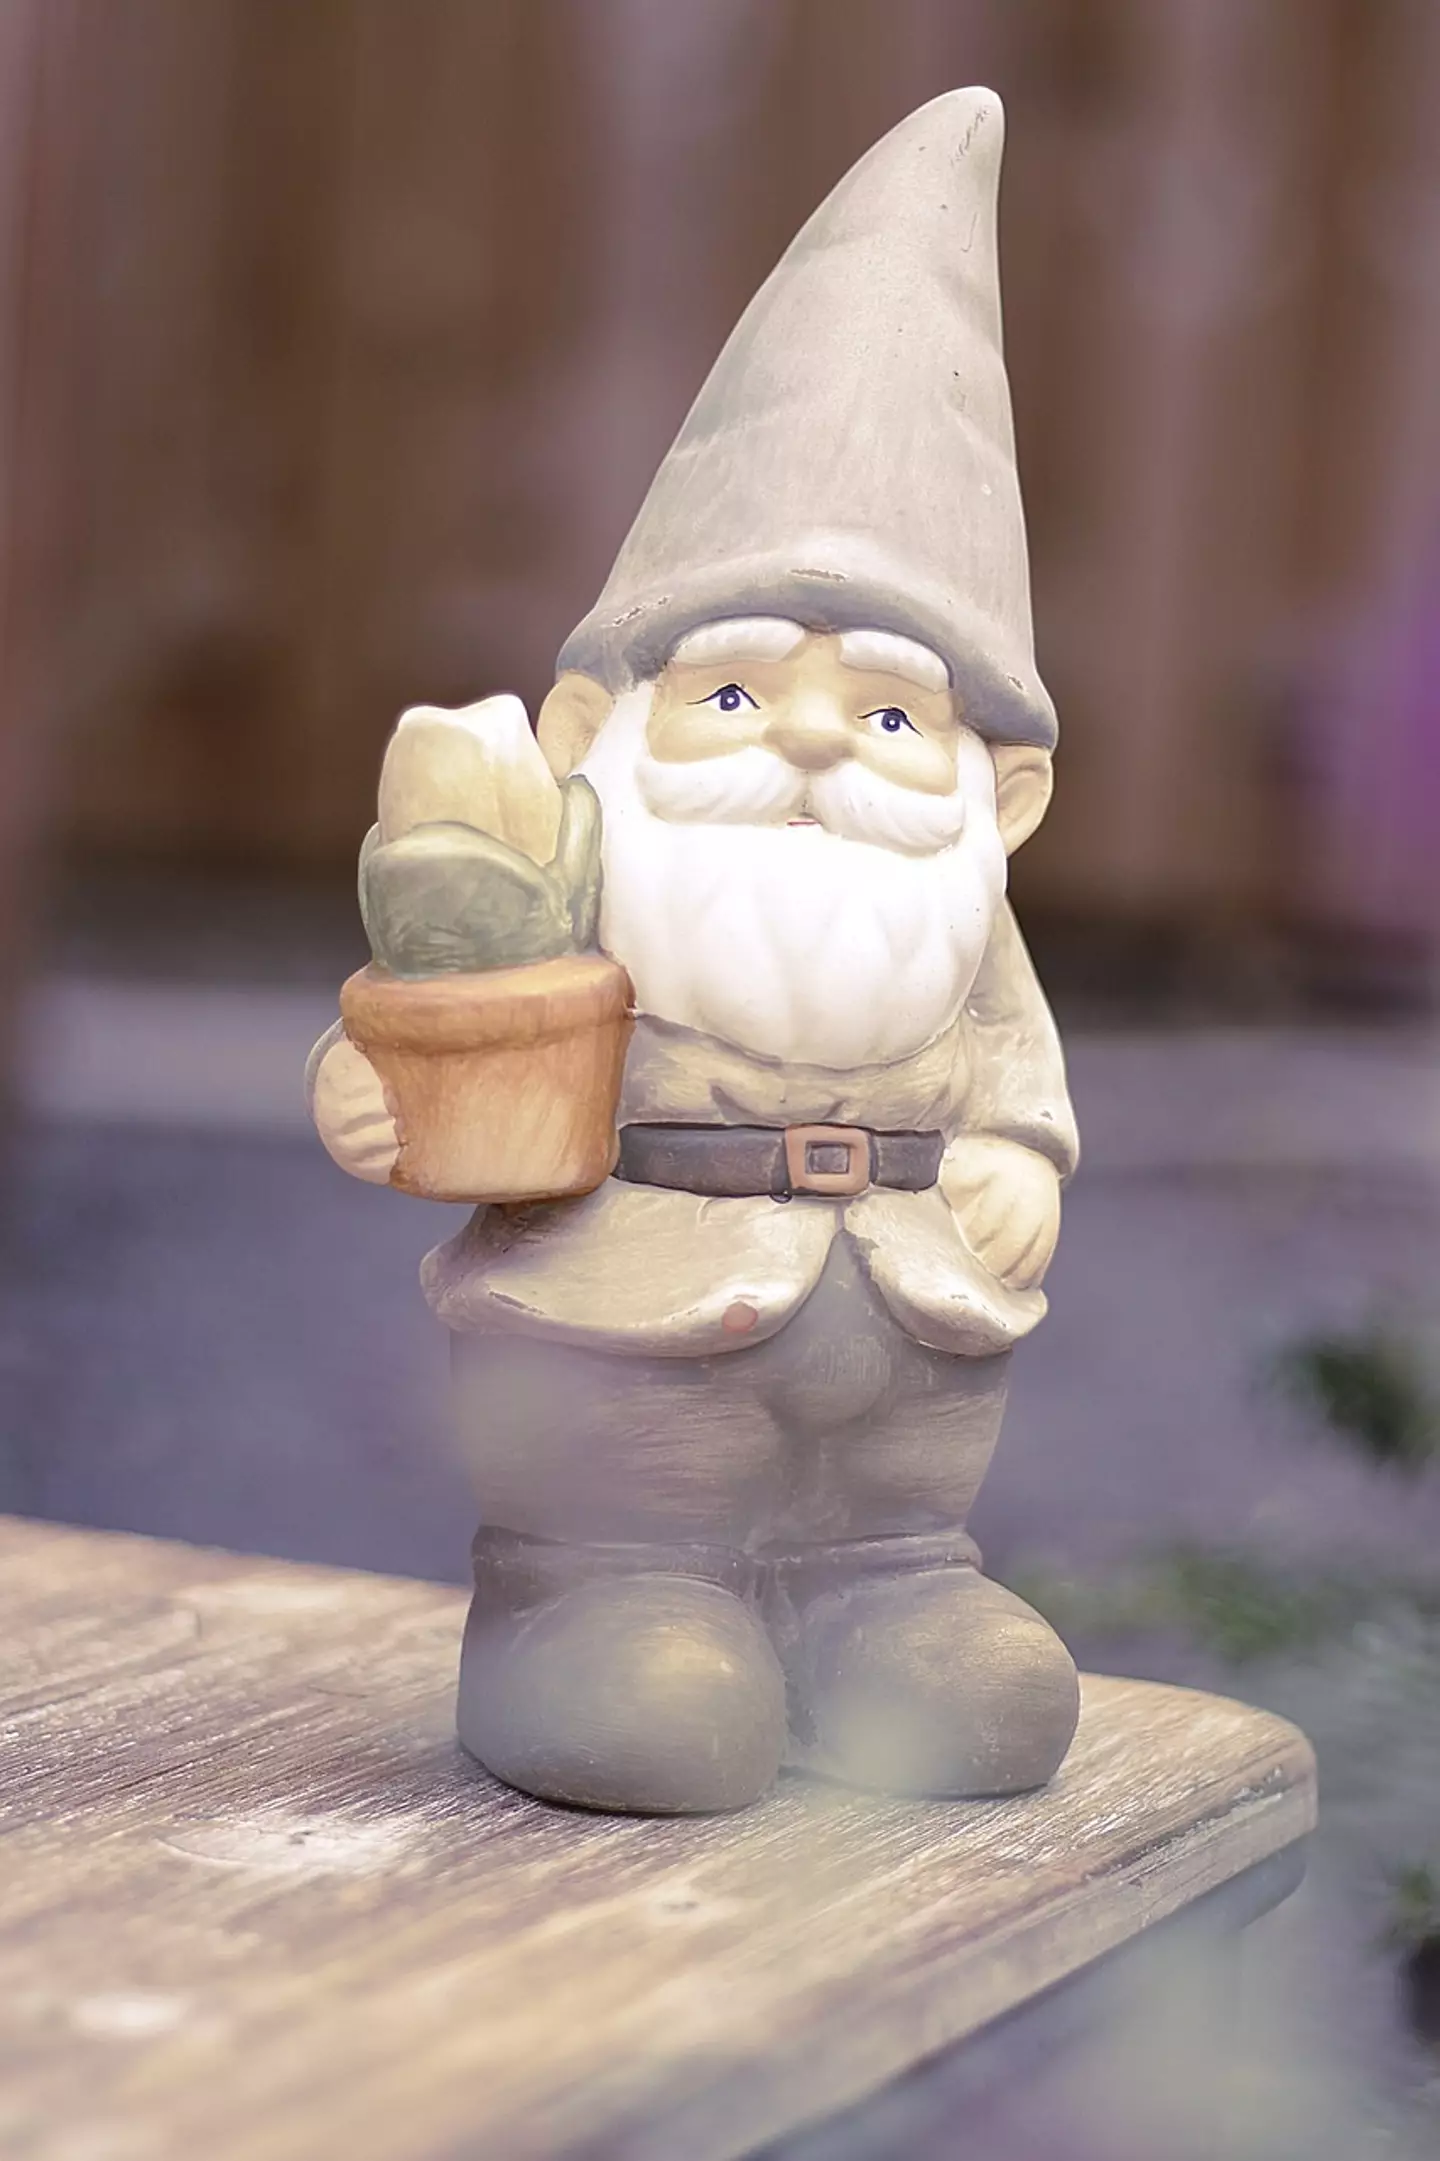 Garden gnomes apparently have a 'hidden' meaning.